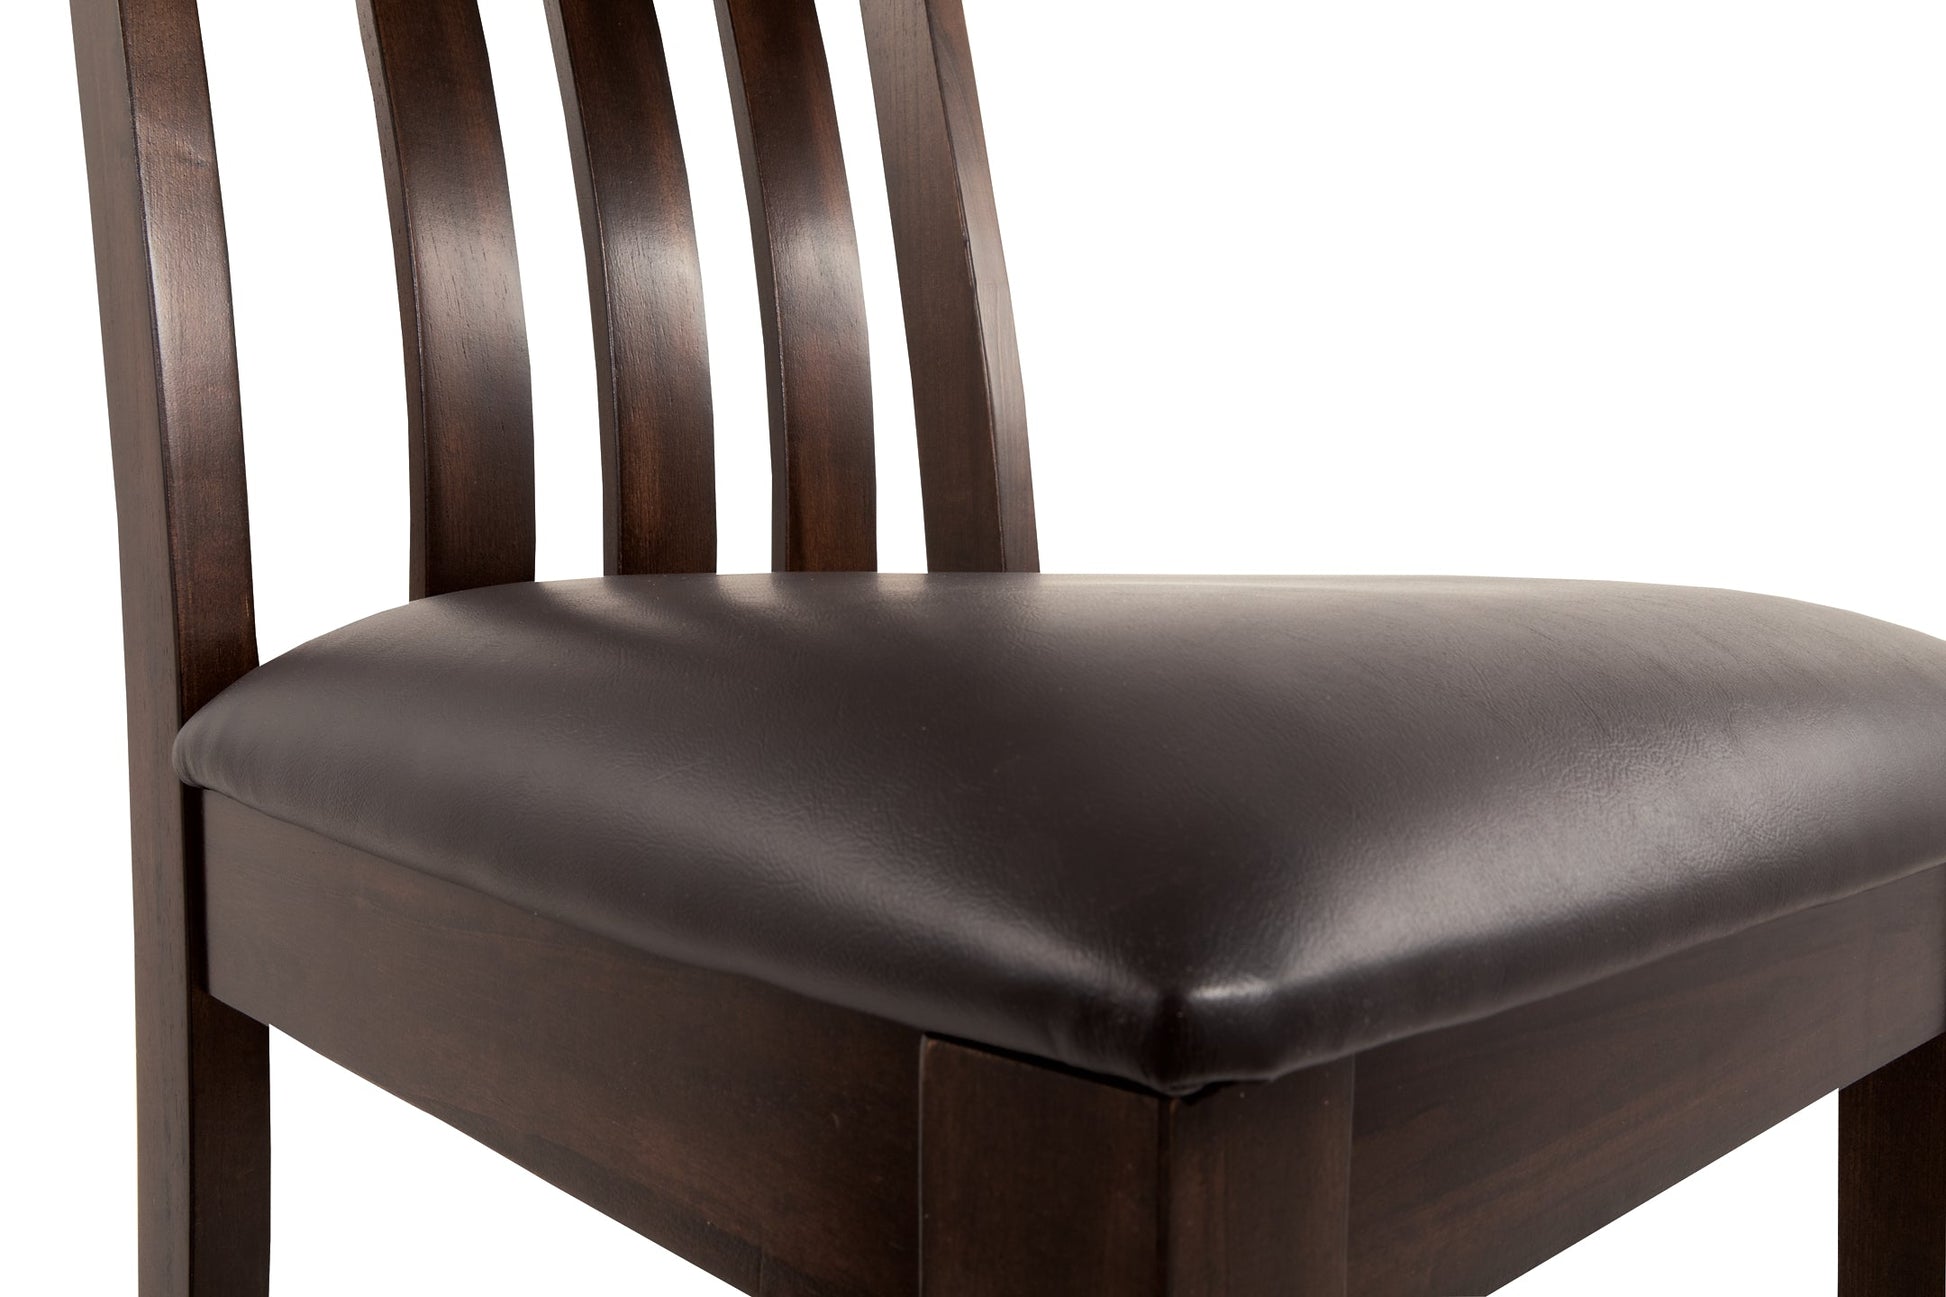 Haddigan Dining UPH Side Chair (2/CN) at Walker Mattress and Furniture Locations in Cedar Park and Belton TX.